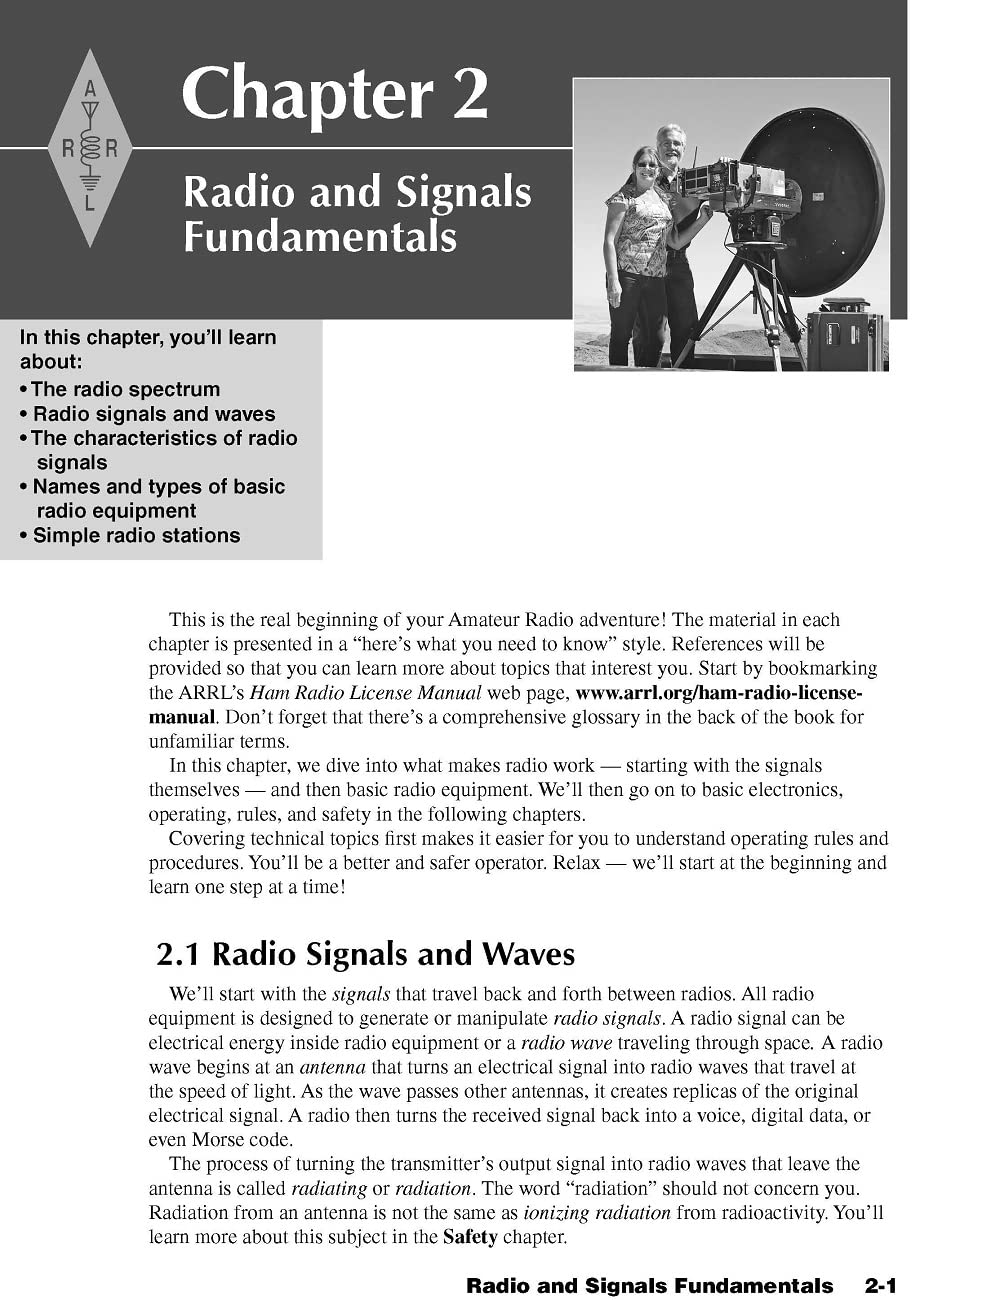 ARRL Ham Radio License Manual 5th Edition – Complete Study Guide with Question Pool to Pass the Technician Class Amateur Radio Exam